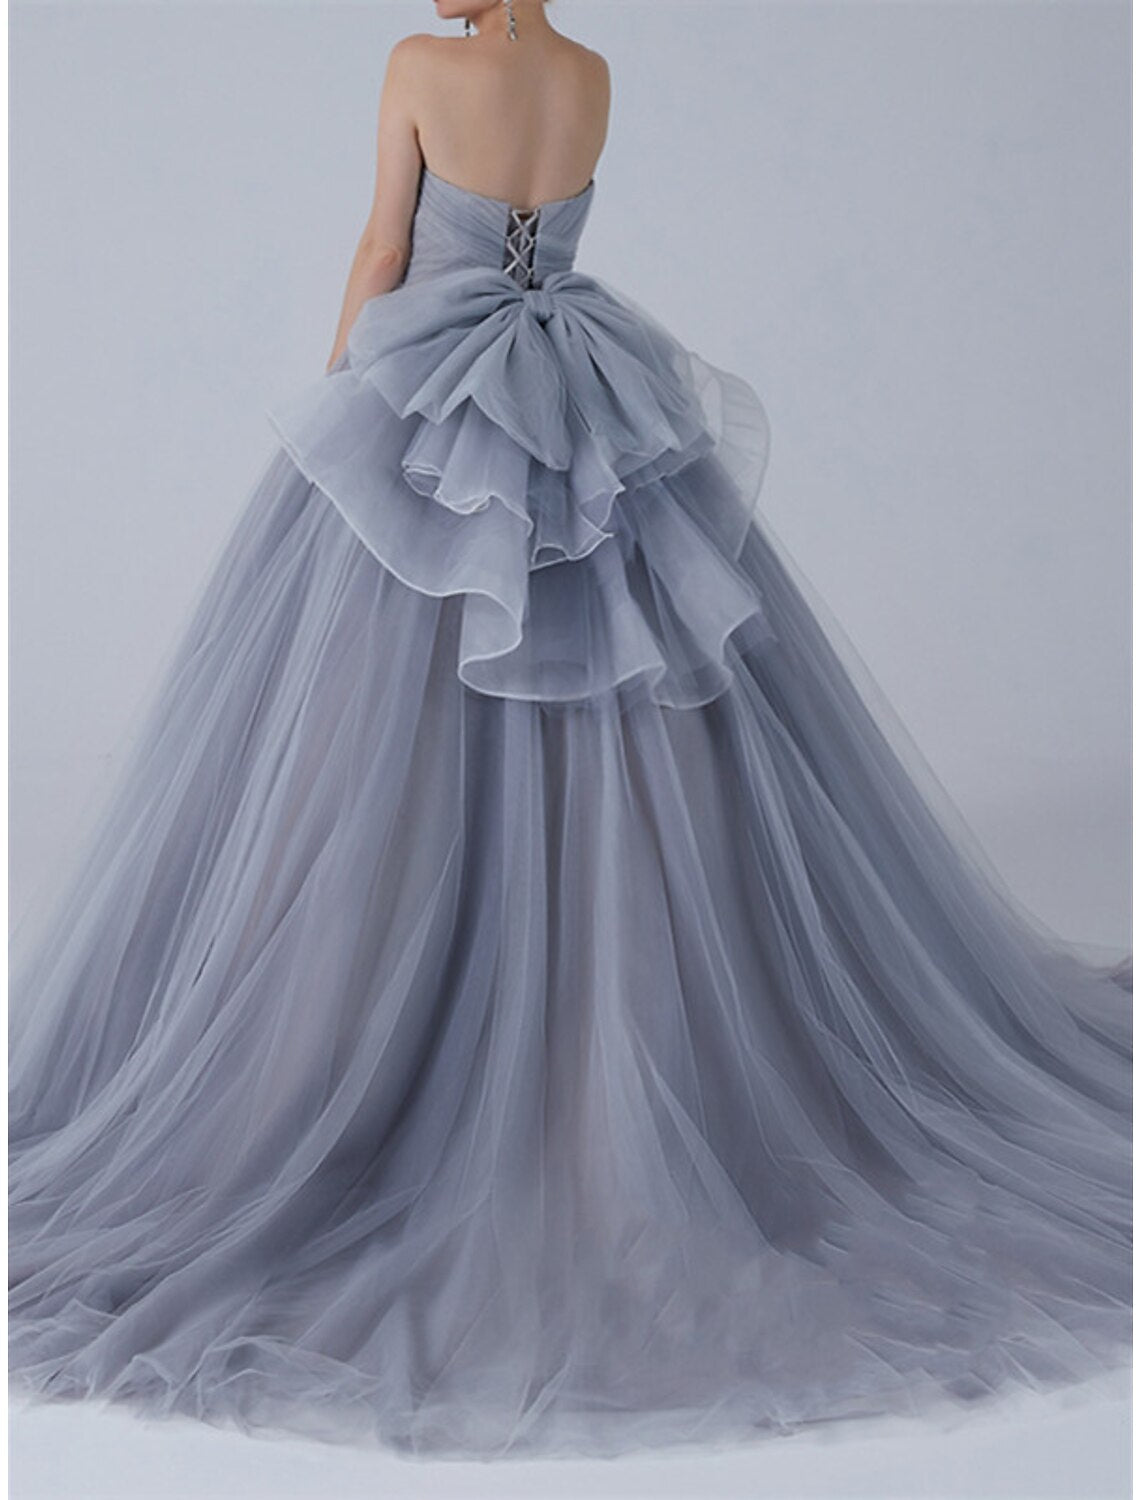 Ball Gown Prom Dresses Luxurious Dress Quinceanera Prom Sweep / Brush Train Short Sleeve Off Shoulder Organza with Bow(s) Pleats